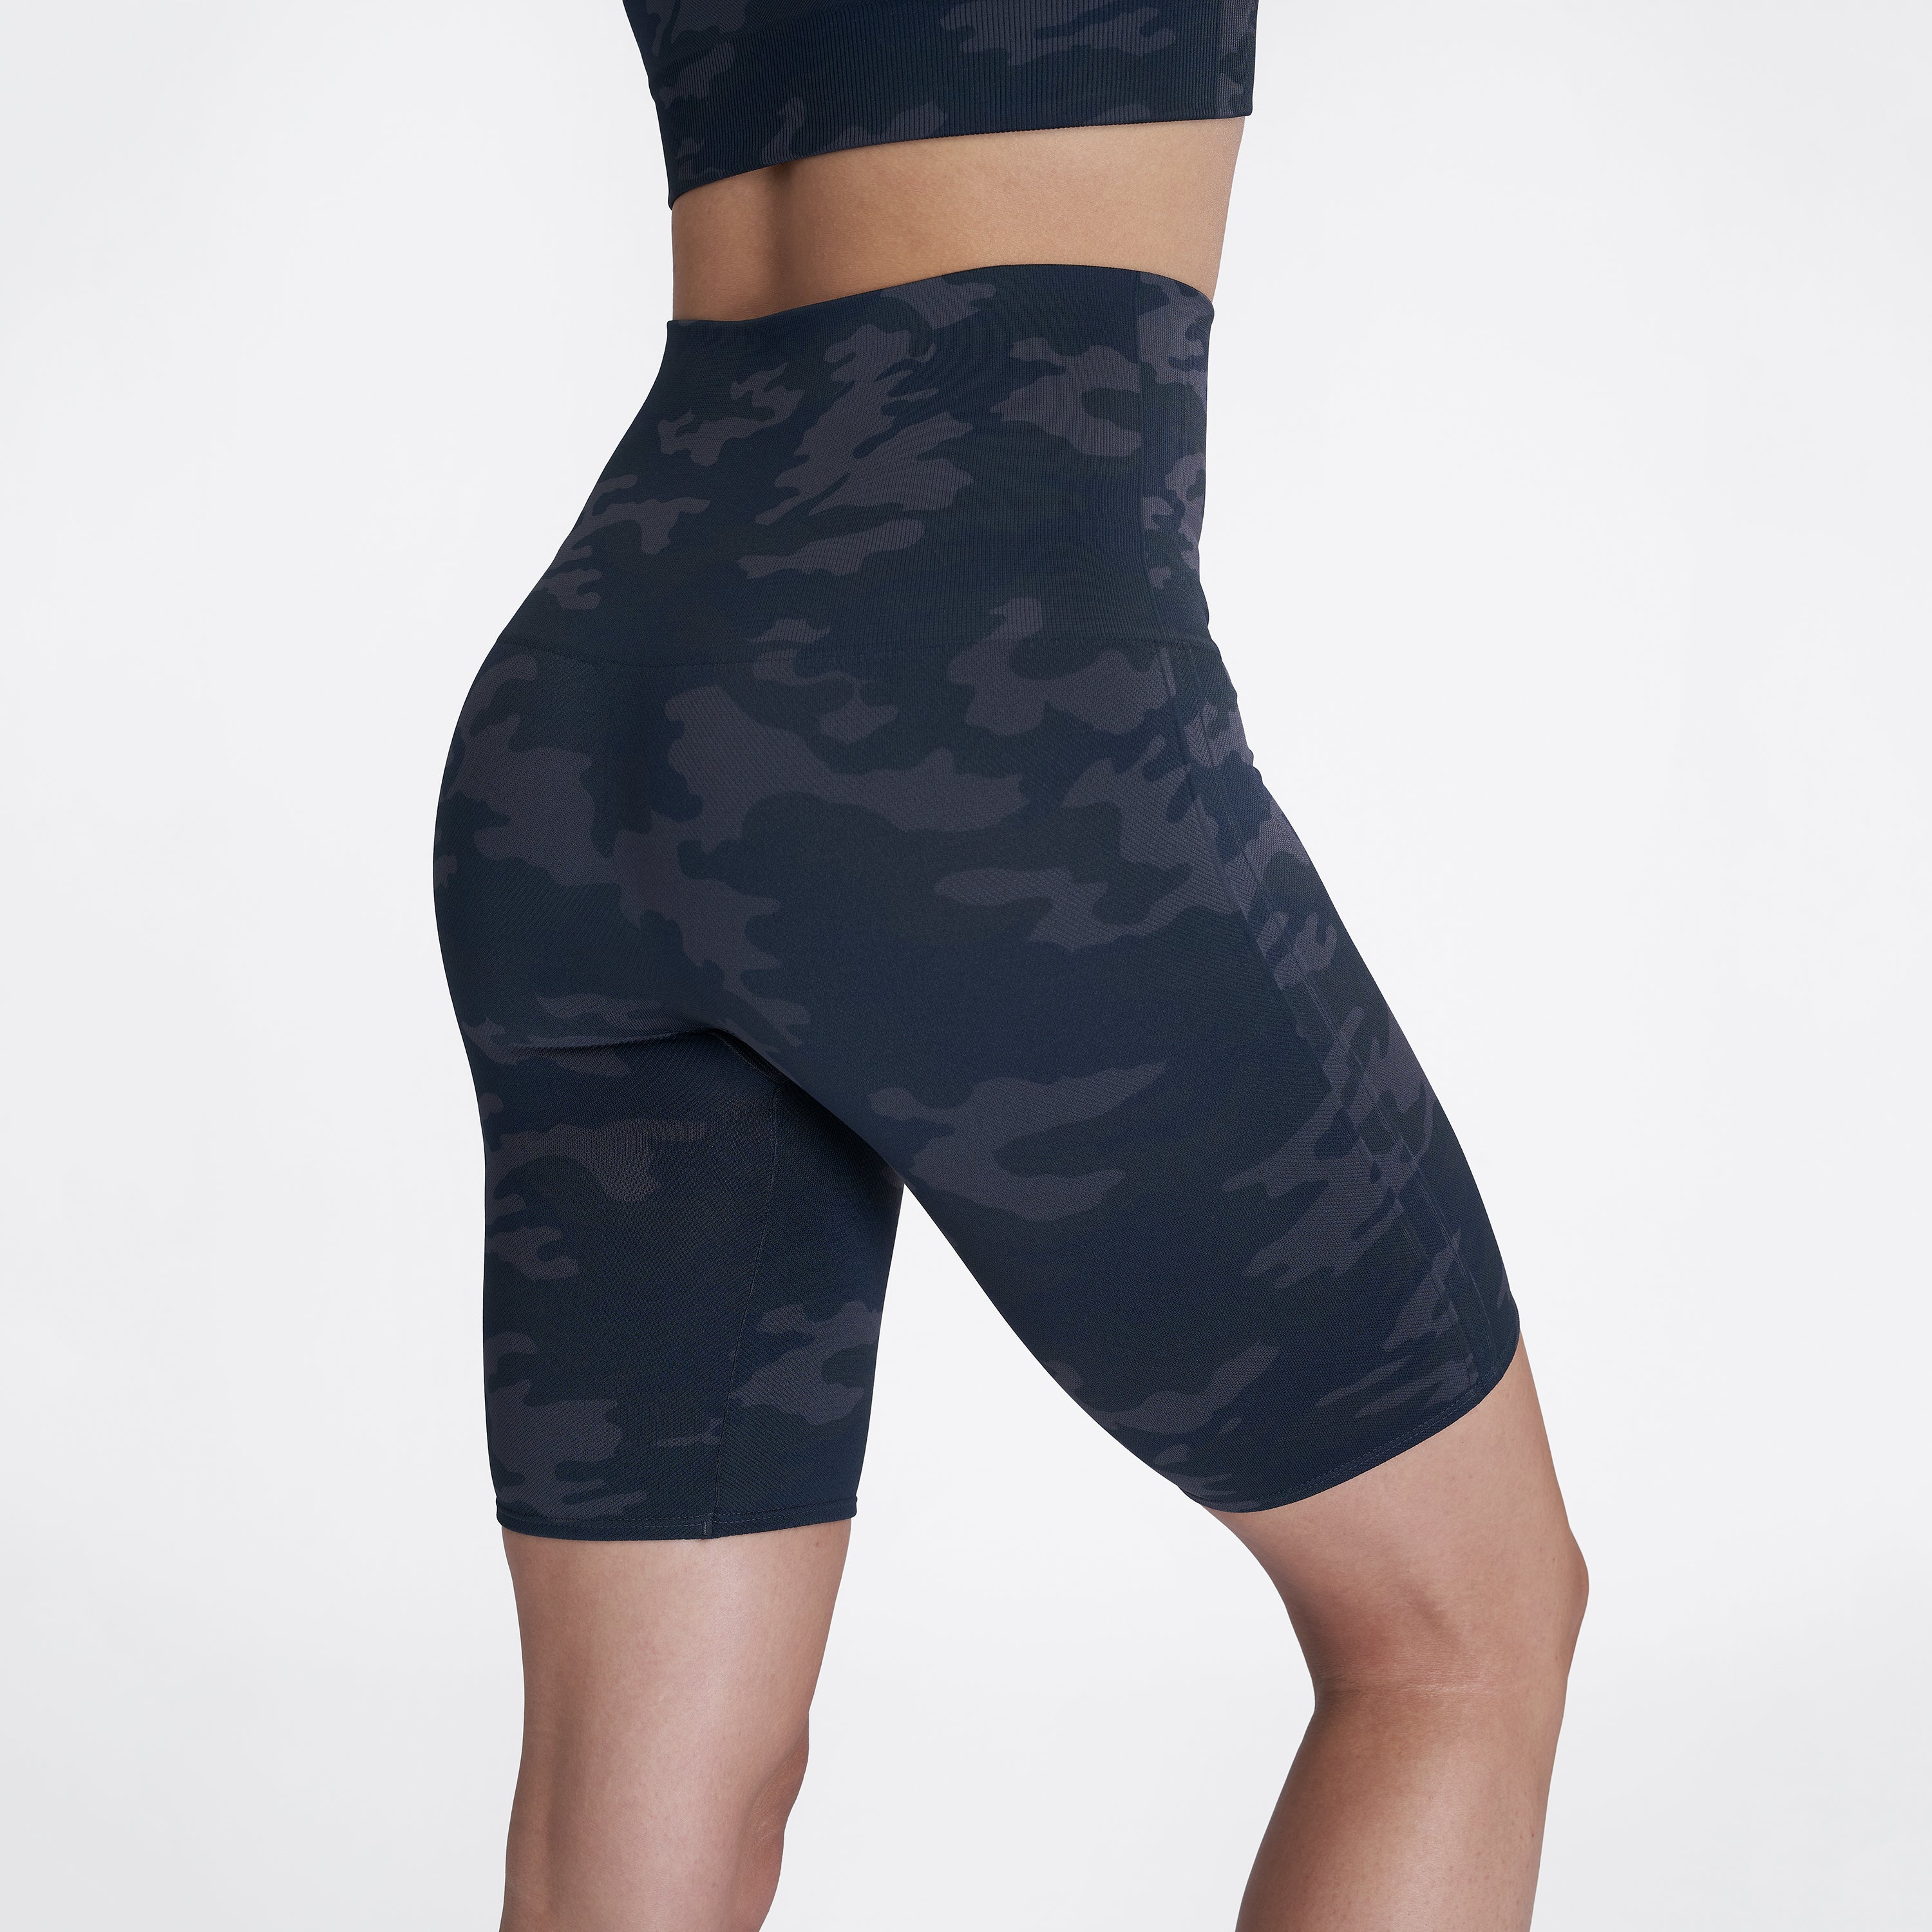 Look At Me Now Bike Short – Spanx